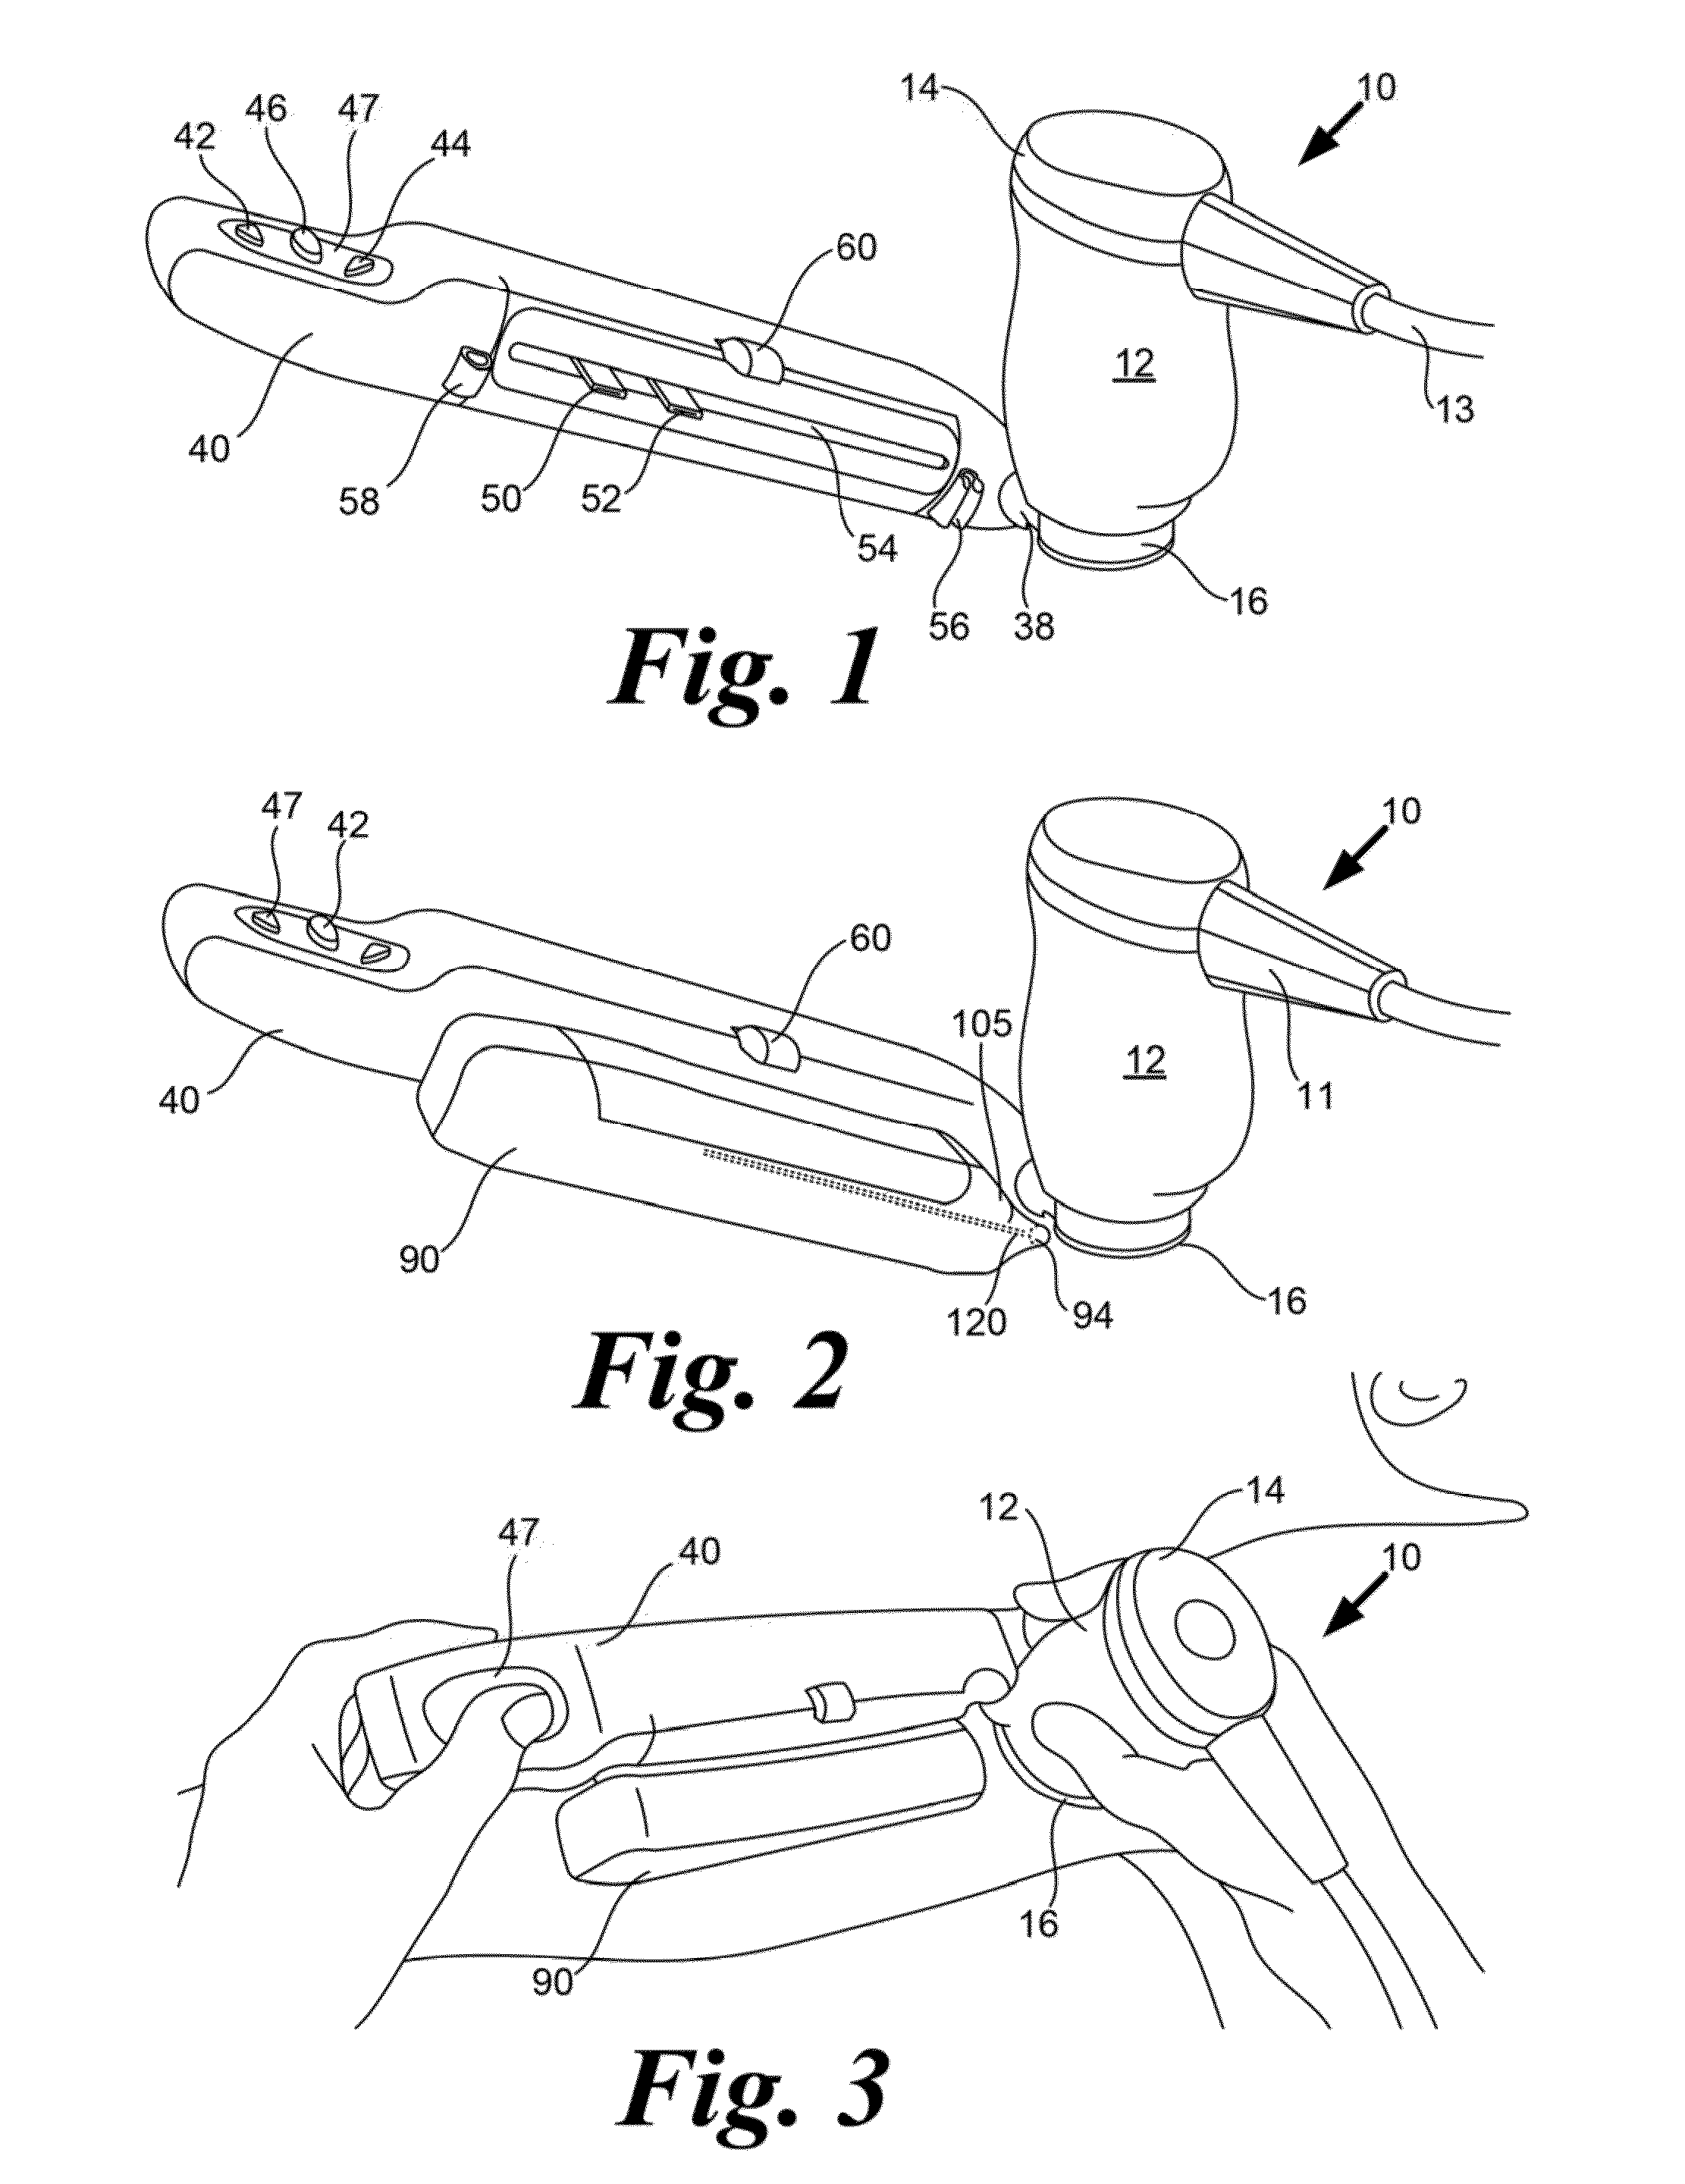 Neuro-vasculature access system and device